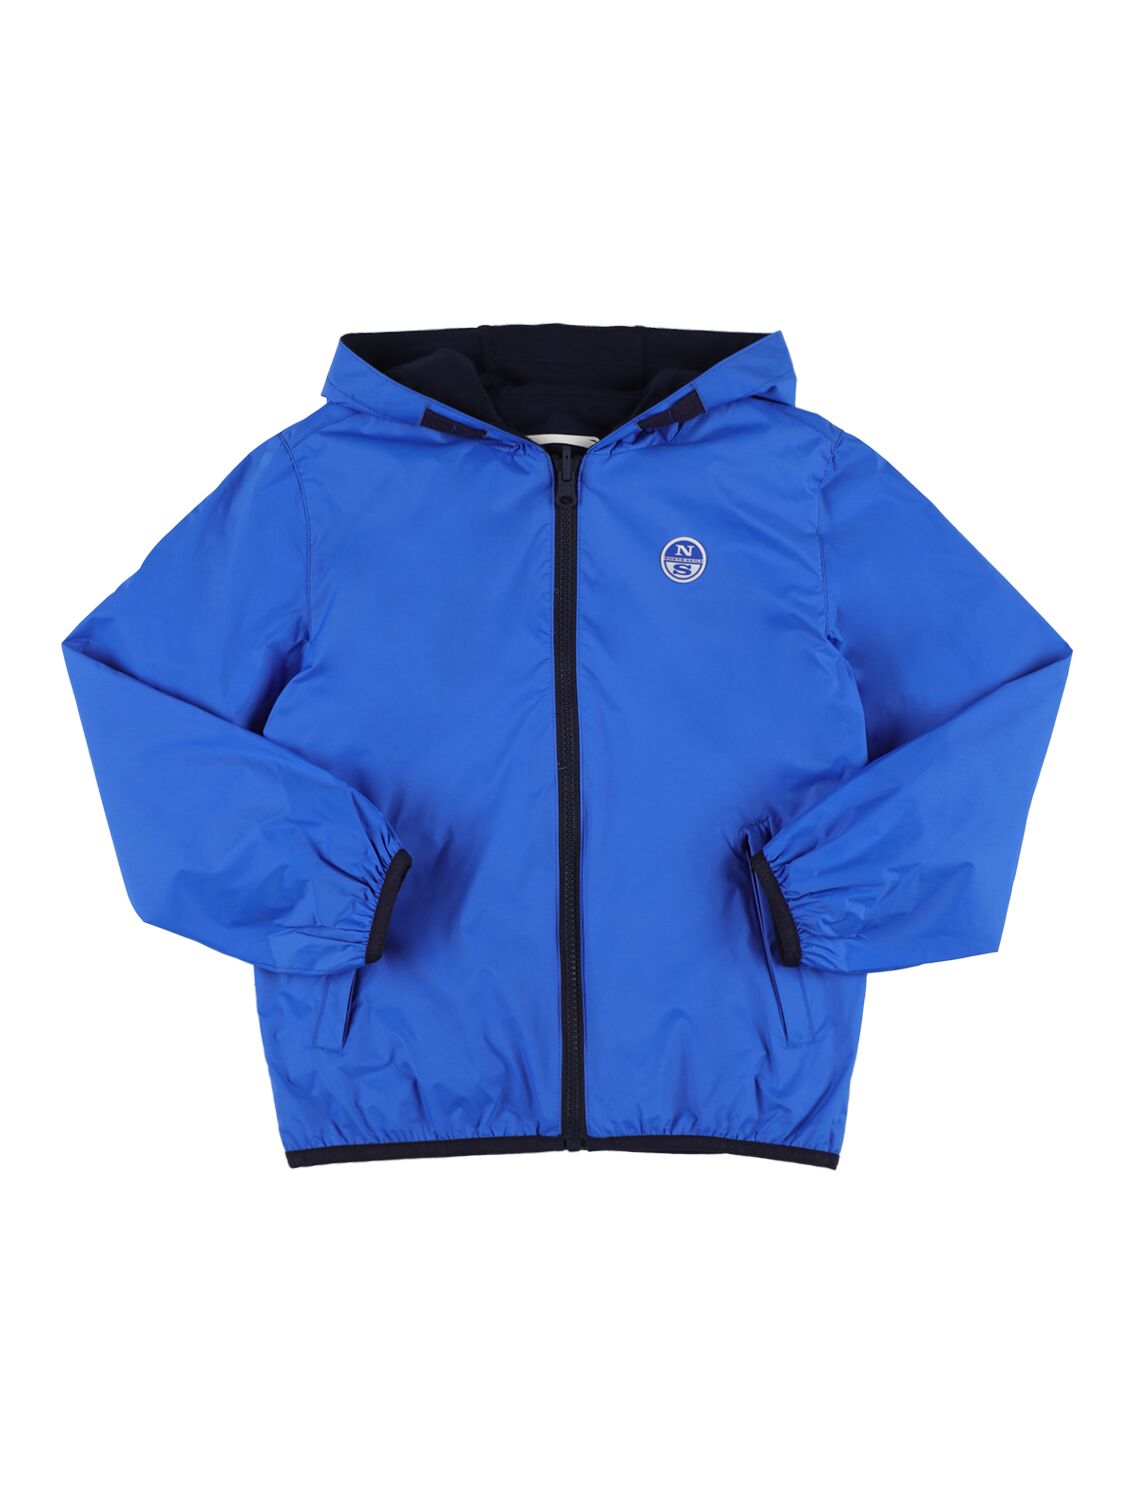 North Sails Kids' Reversible Recycled Poly Windbreaker In Royal Blue,navy